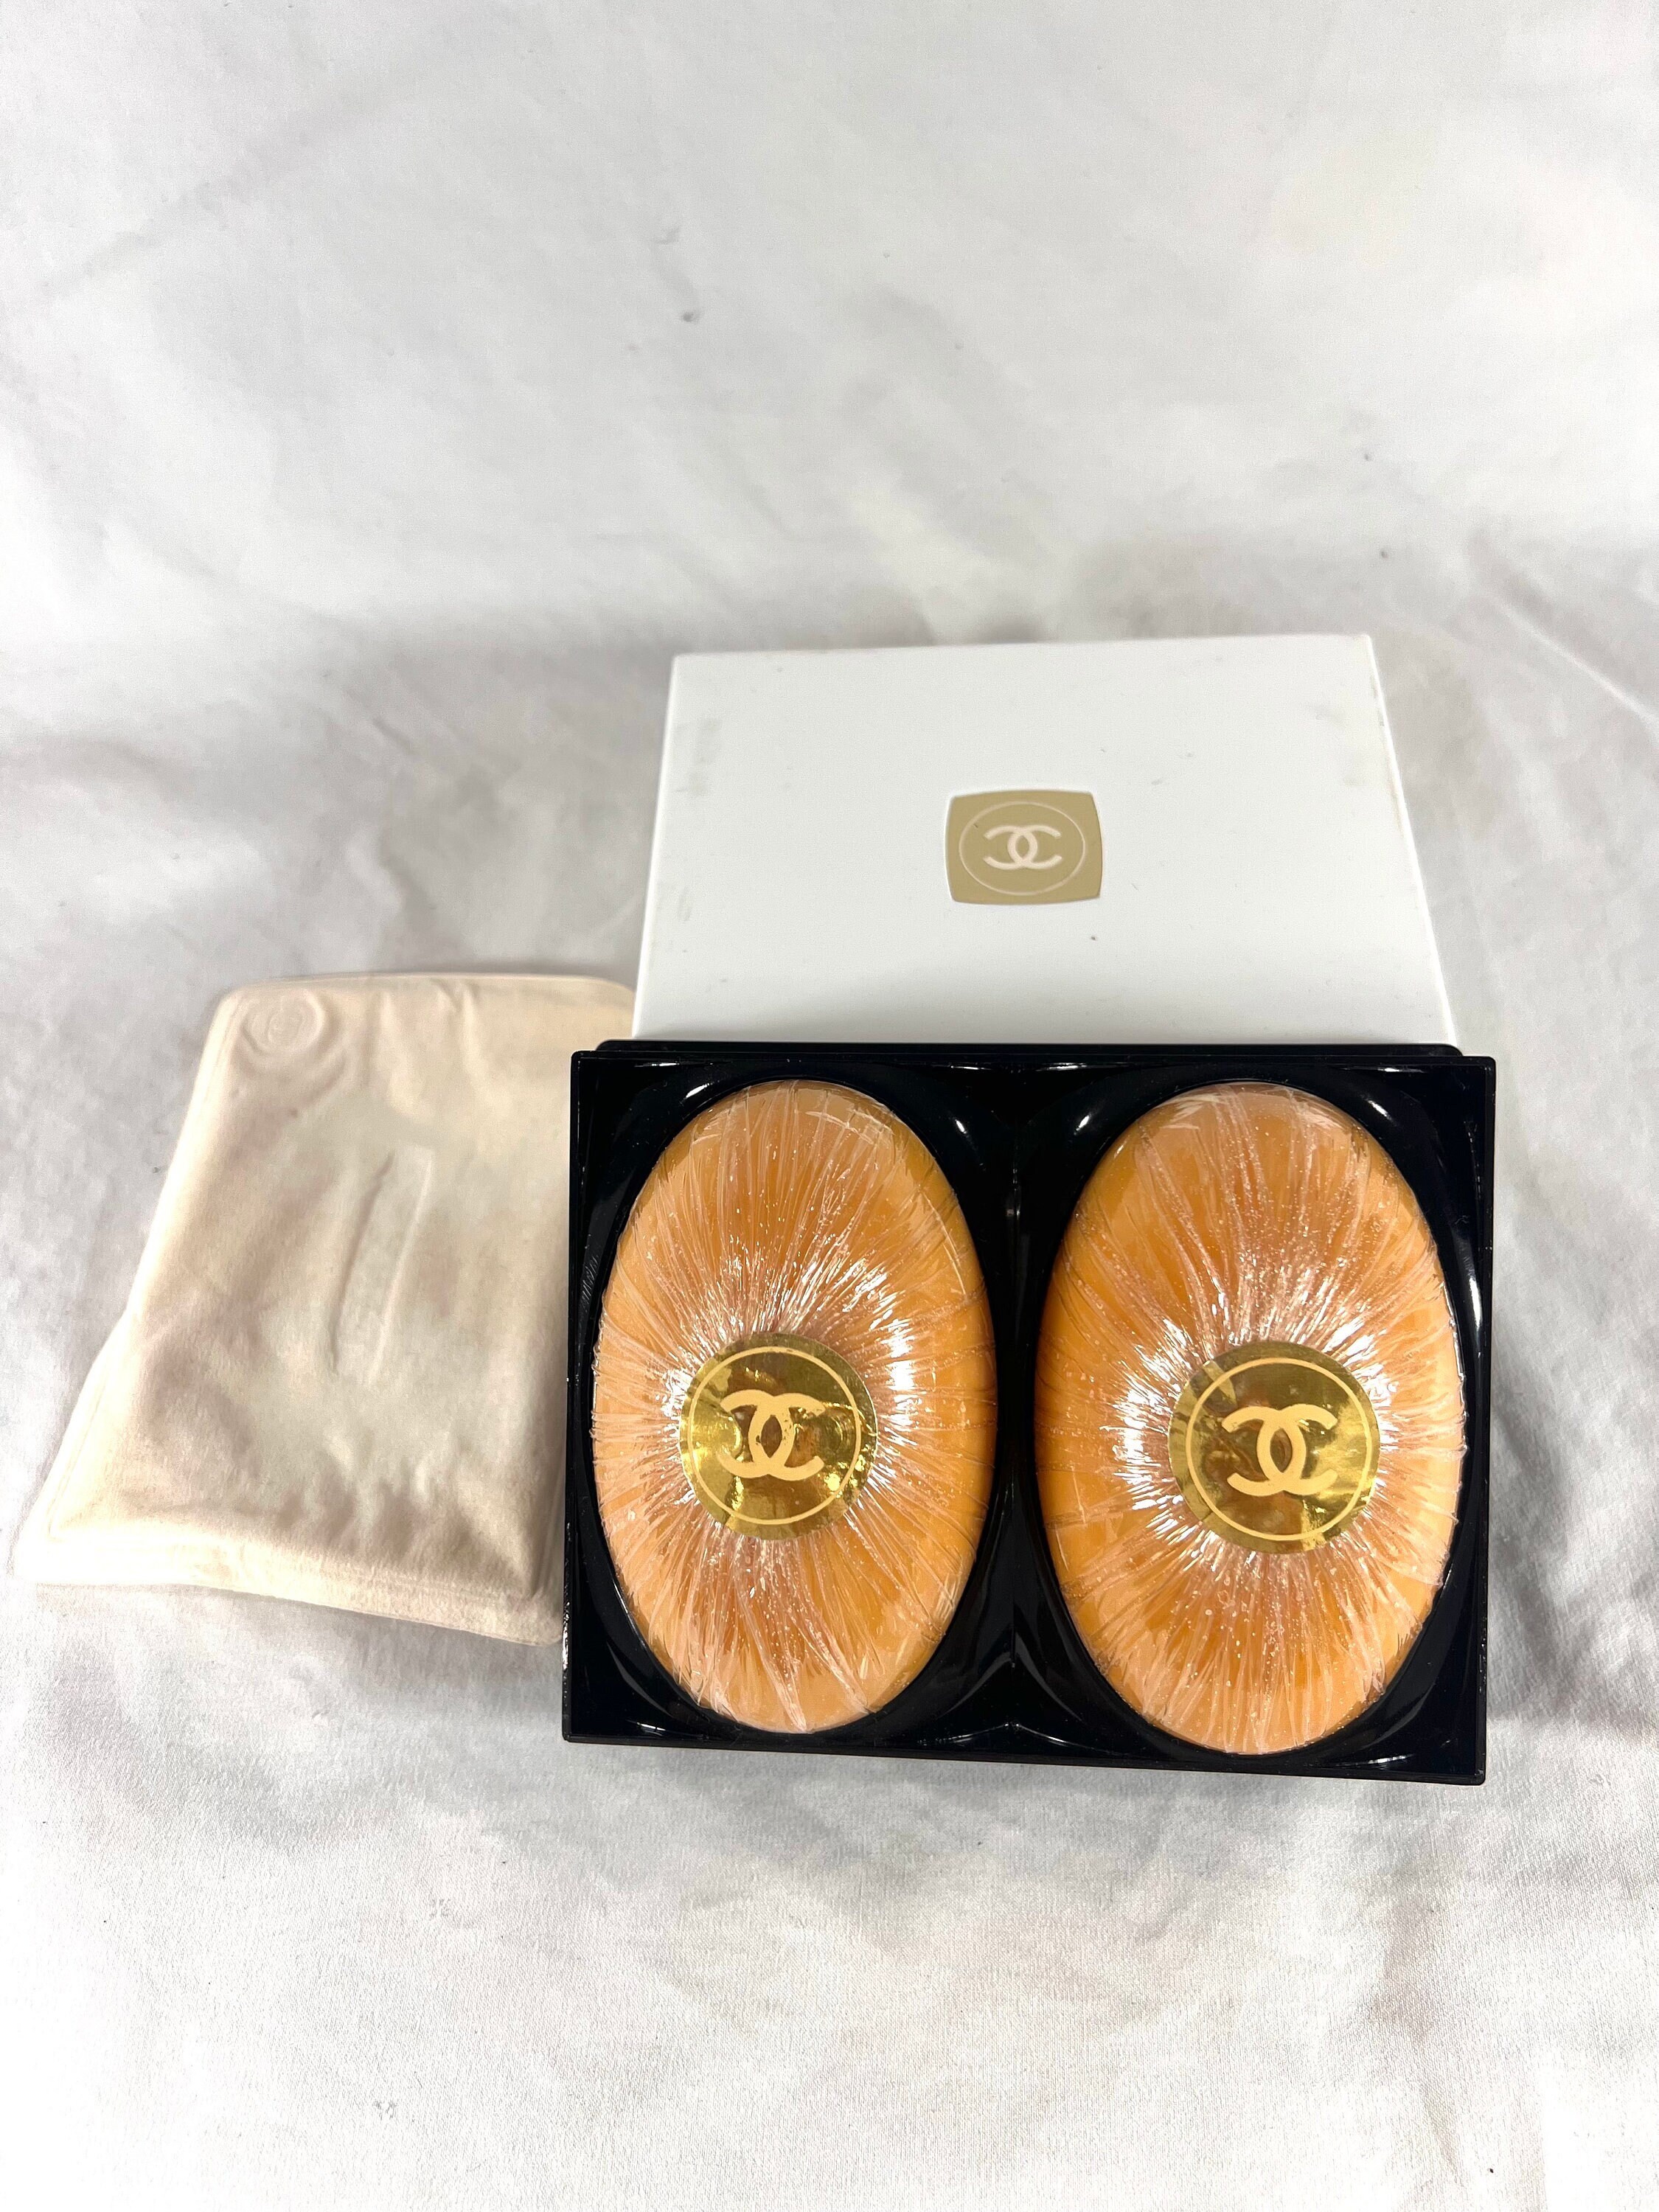 CHANEL Vintage Two Pack Gold Scented Parfum Soap Bars 